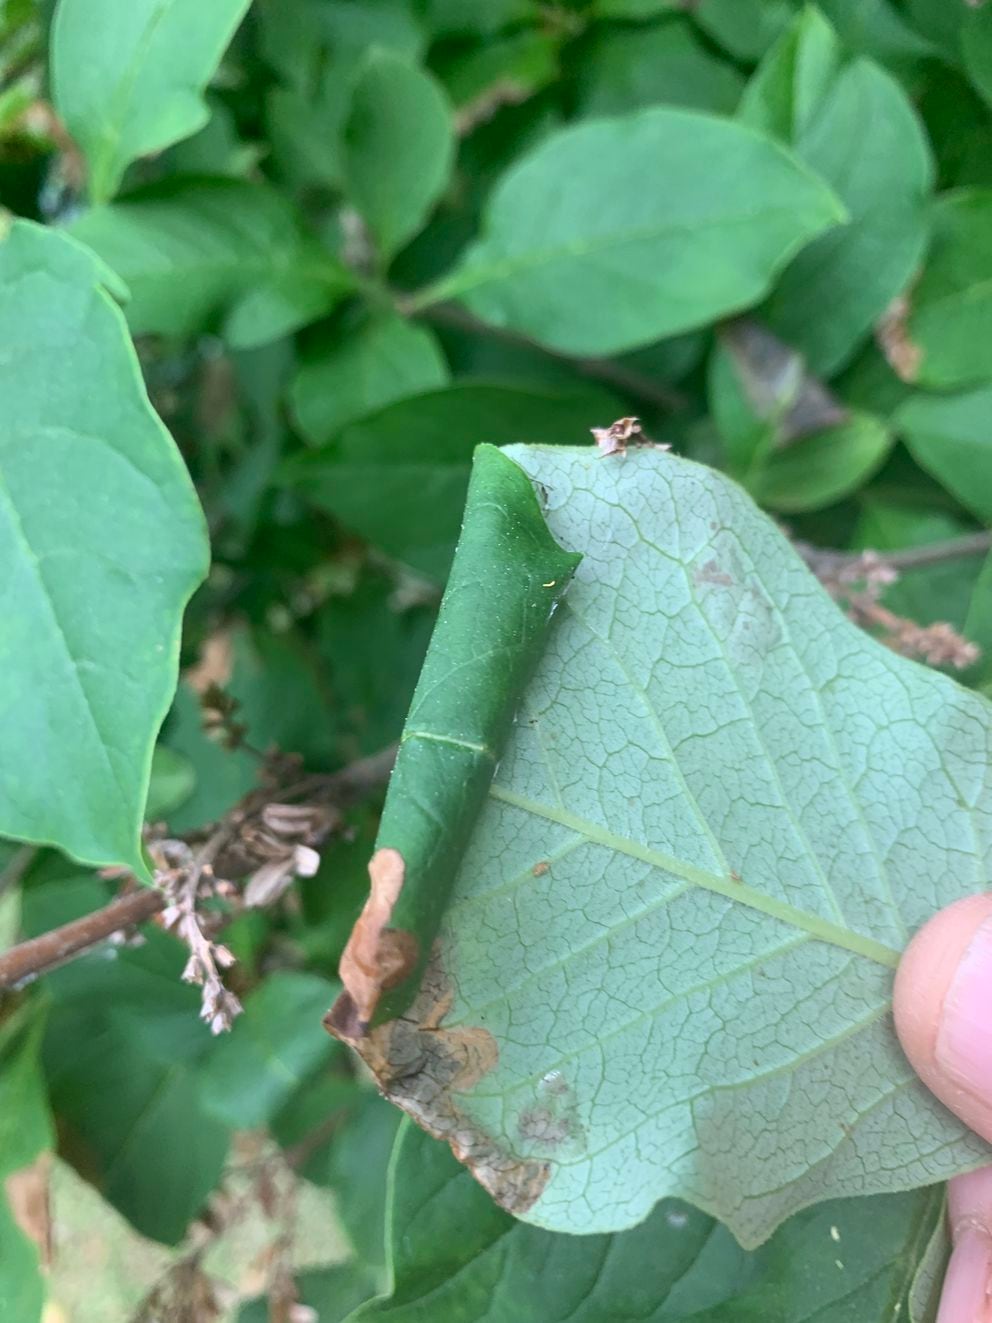 Here S What S Going On With Those Blotchy Brown Spots On Your Lilac Bush Anchorage Daily News